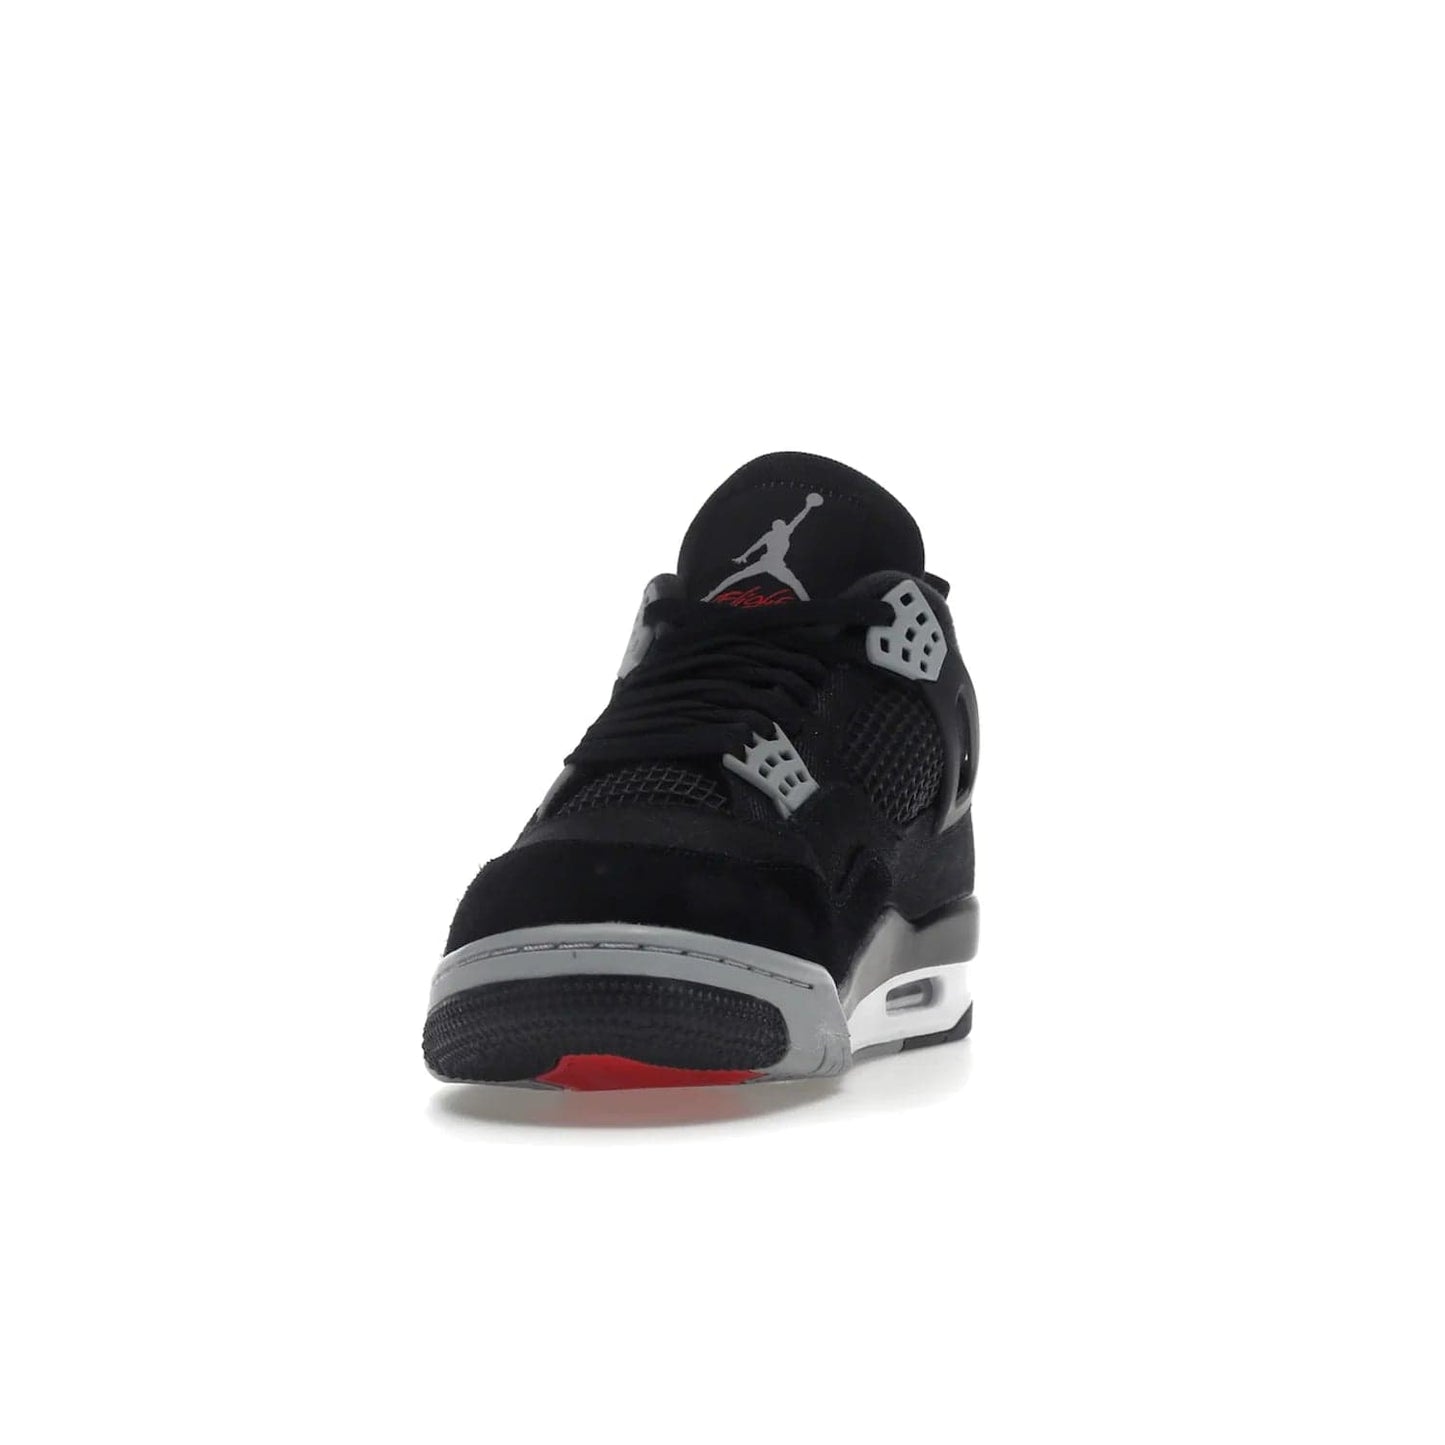 Jordan 4 Retro SE Black Canvas - Image 12 - Only at www.BallersClubKickz.com - The Air Jordan 4 Retro SE Black Canvas brings timeless style and modern luxury. Classic mid-top sneaker in black canvas and grey suede with tonal Jumpman logo, Flight logo and polyurethane midsole with visible Air-sole cushioning. Refresh your sneaker collection and rock the Air Jordan 4 Retro SE Black Canvas.